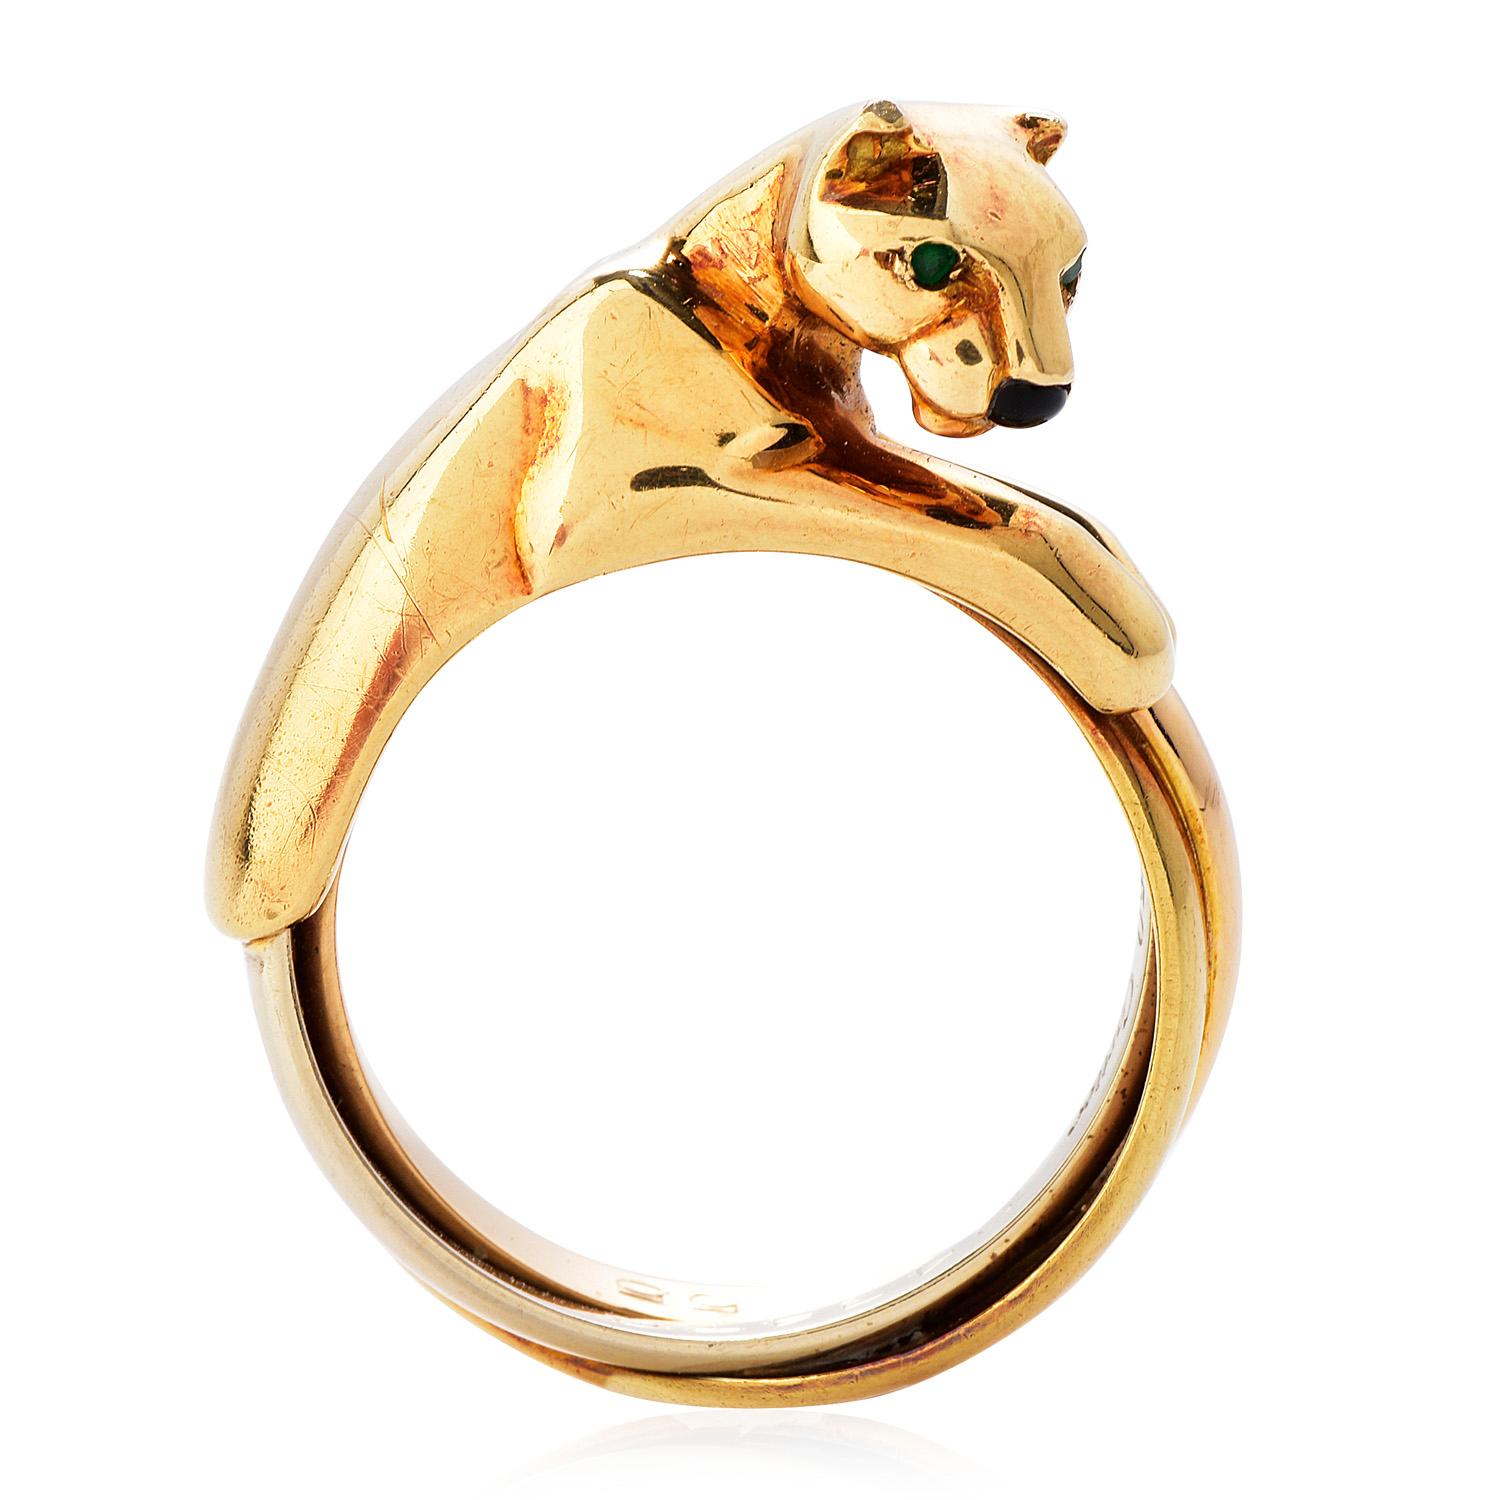 Cartier Maillon Panthere 18K Gold 3 Row Panther Cocktail Ring

This outstanding example of Cartier's timelessness has a panther as the center of attention.

18K Yellow Gold Panthere 3 Row Cocktail Ring by Cartier.

Two vibrant green Emeralds